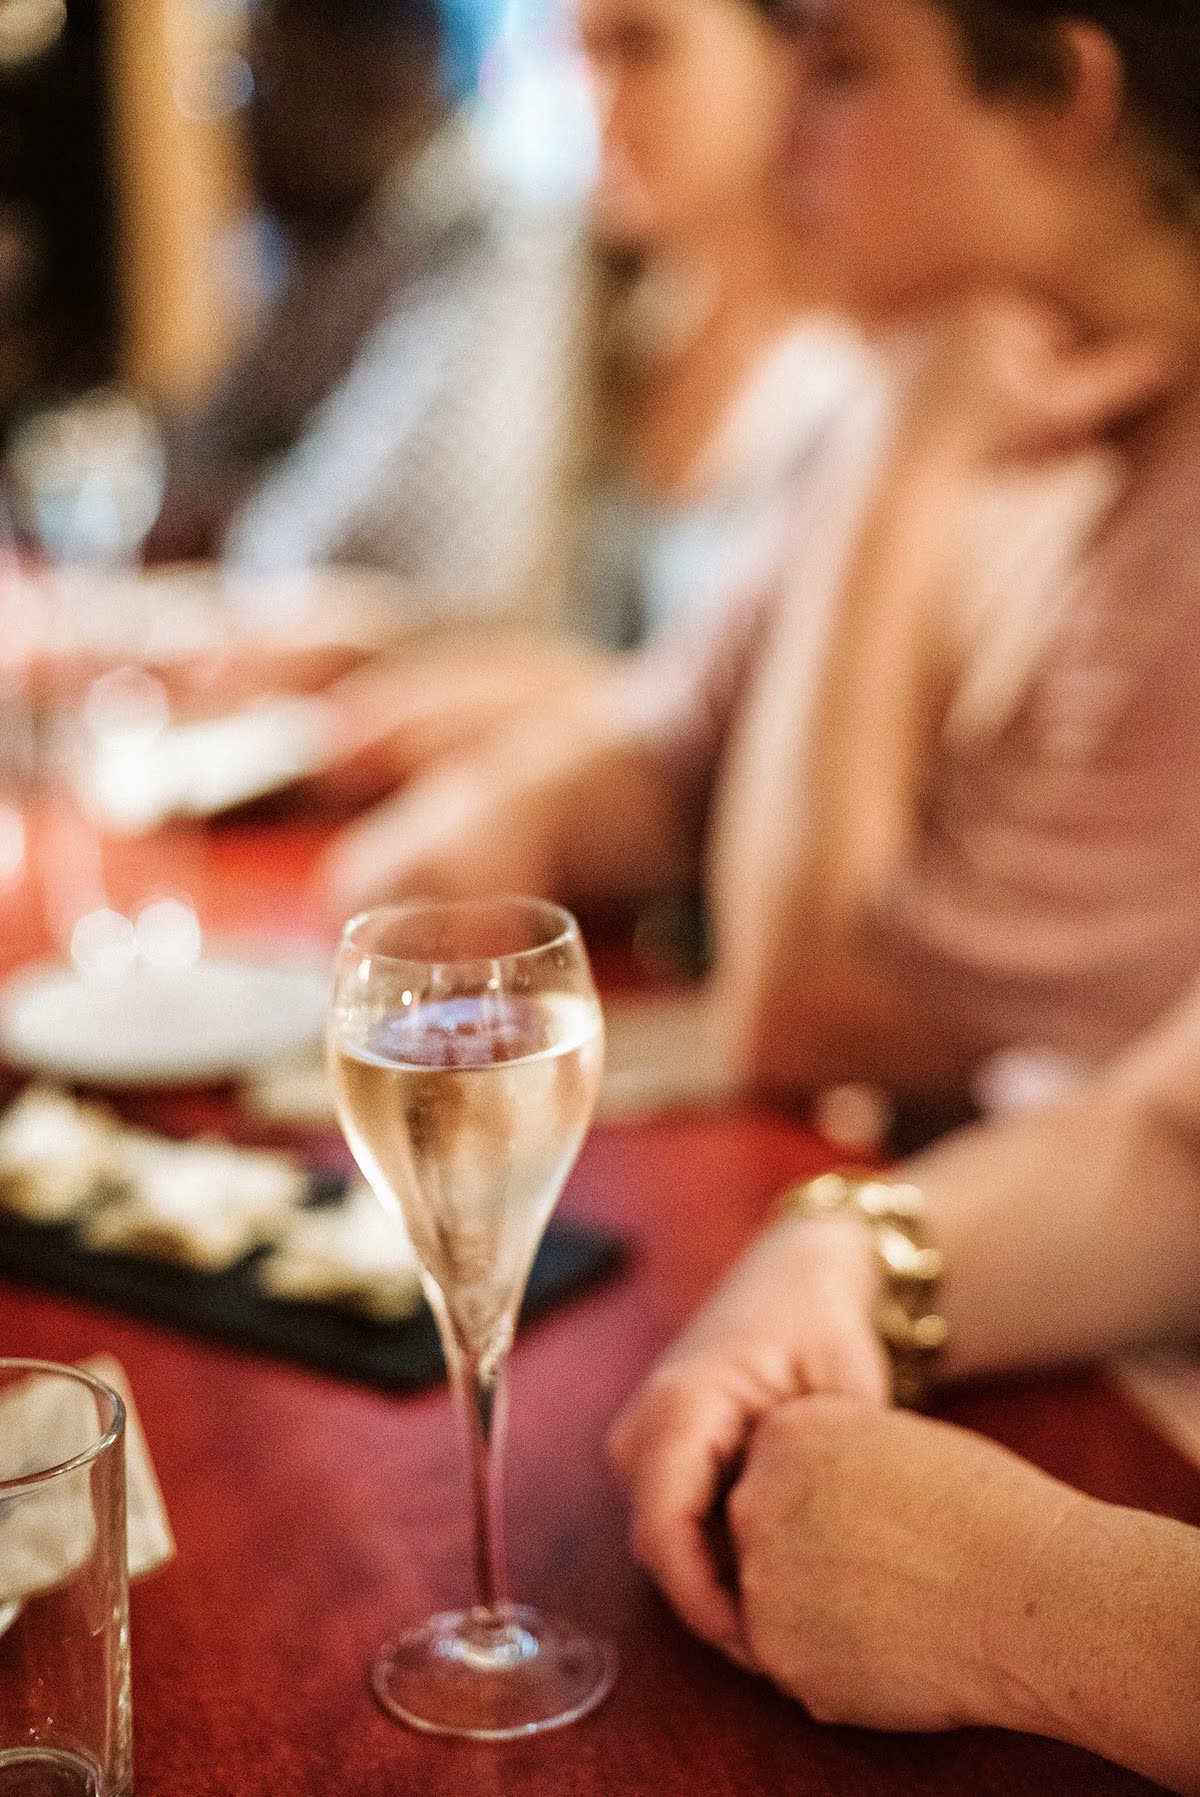 Glass of sparkling wine on a red table surrounded by people and other dishes